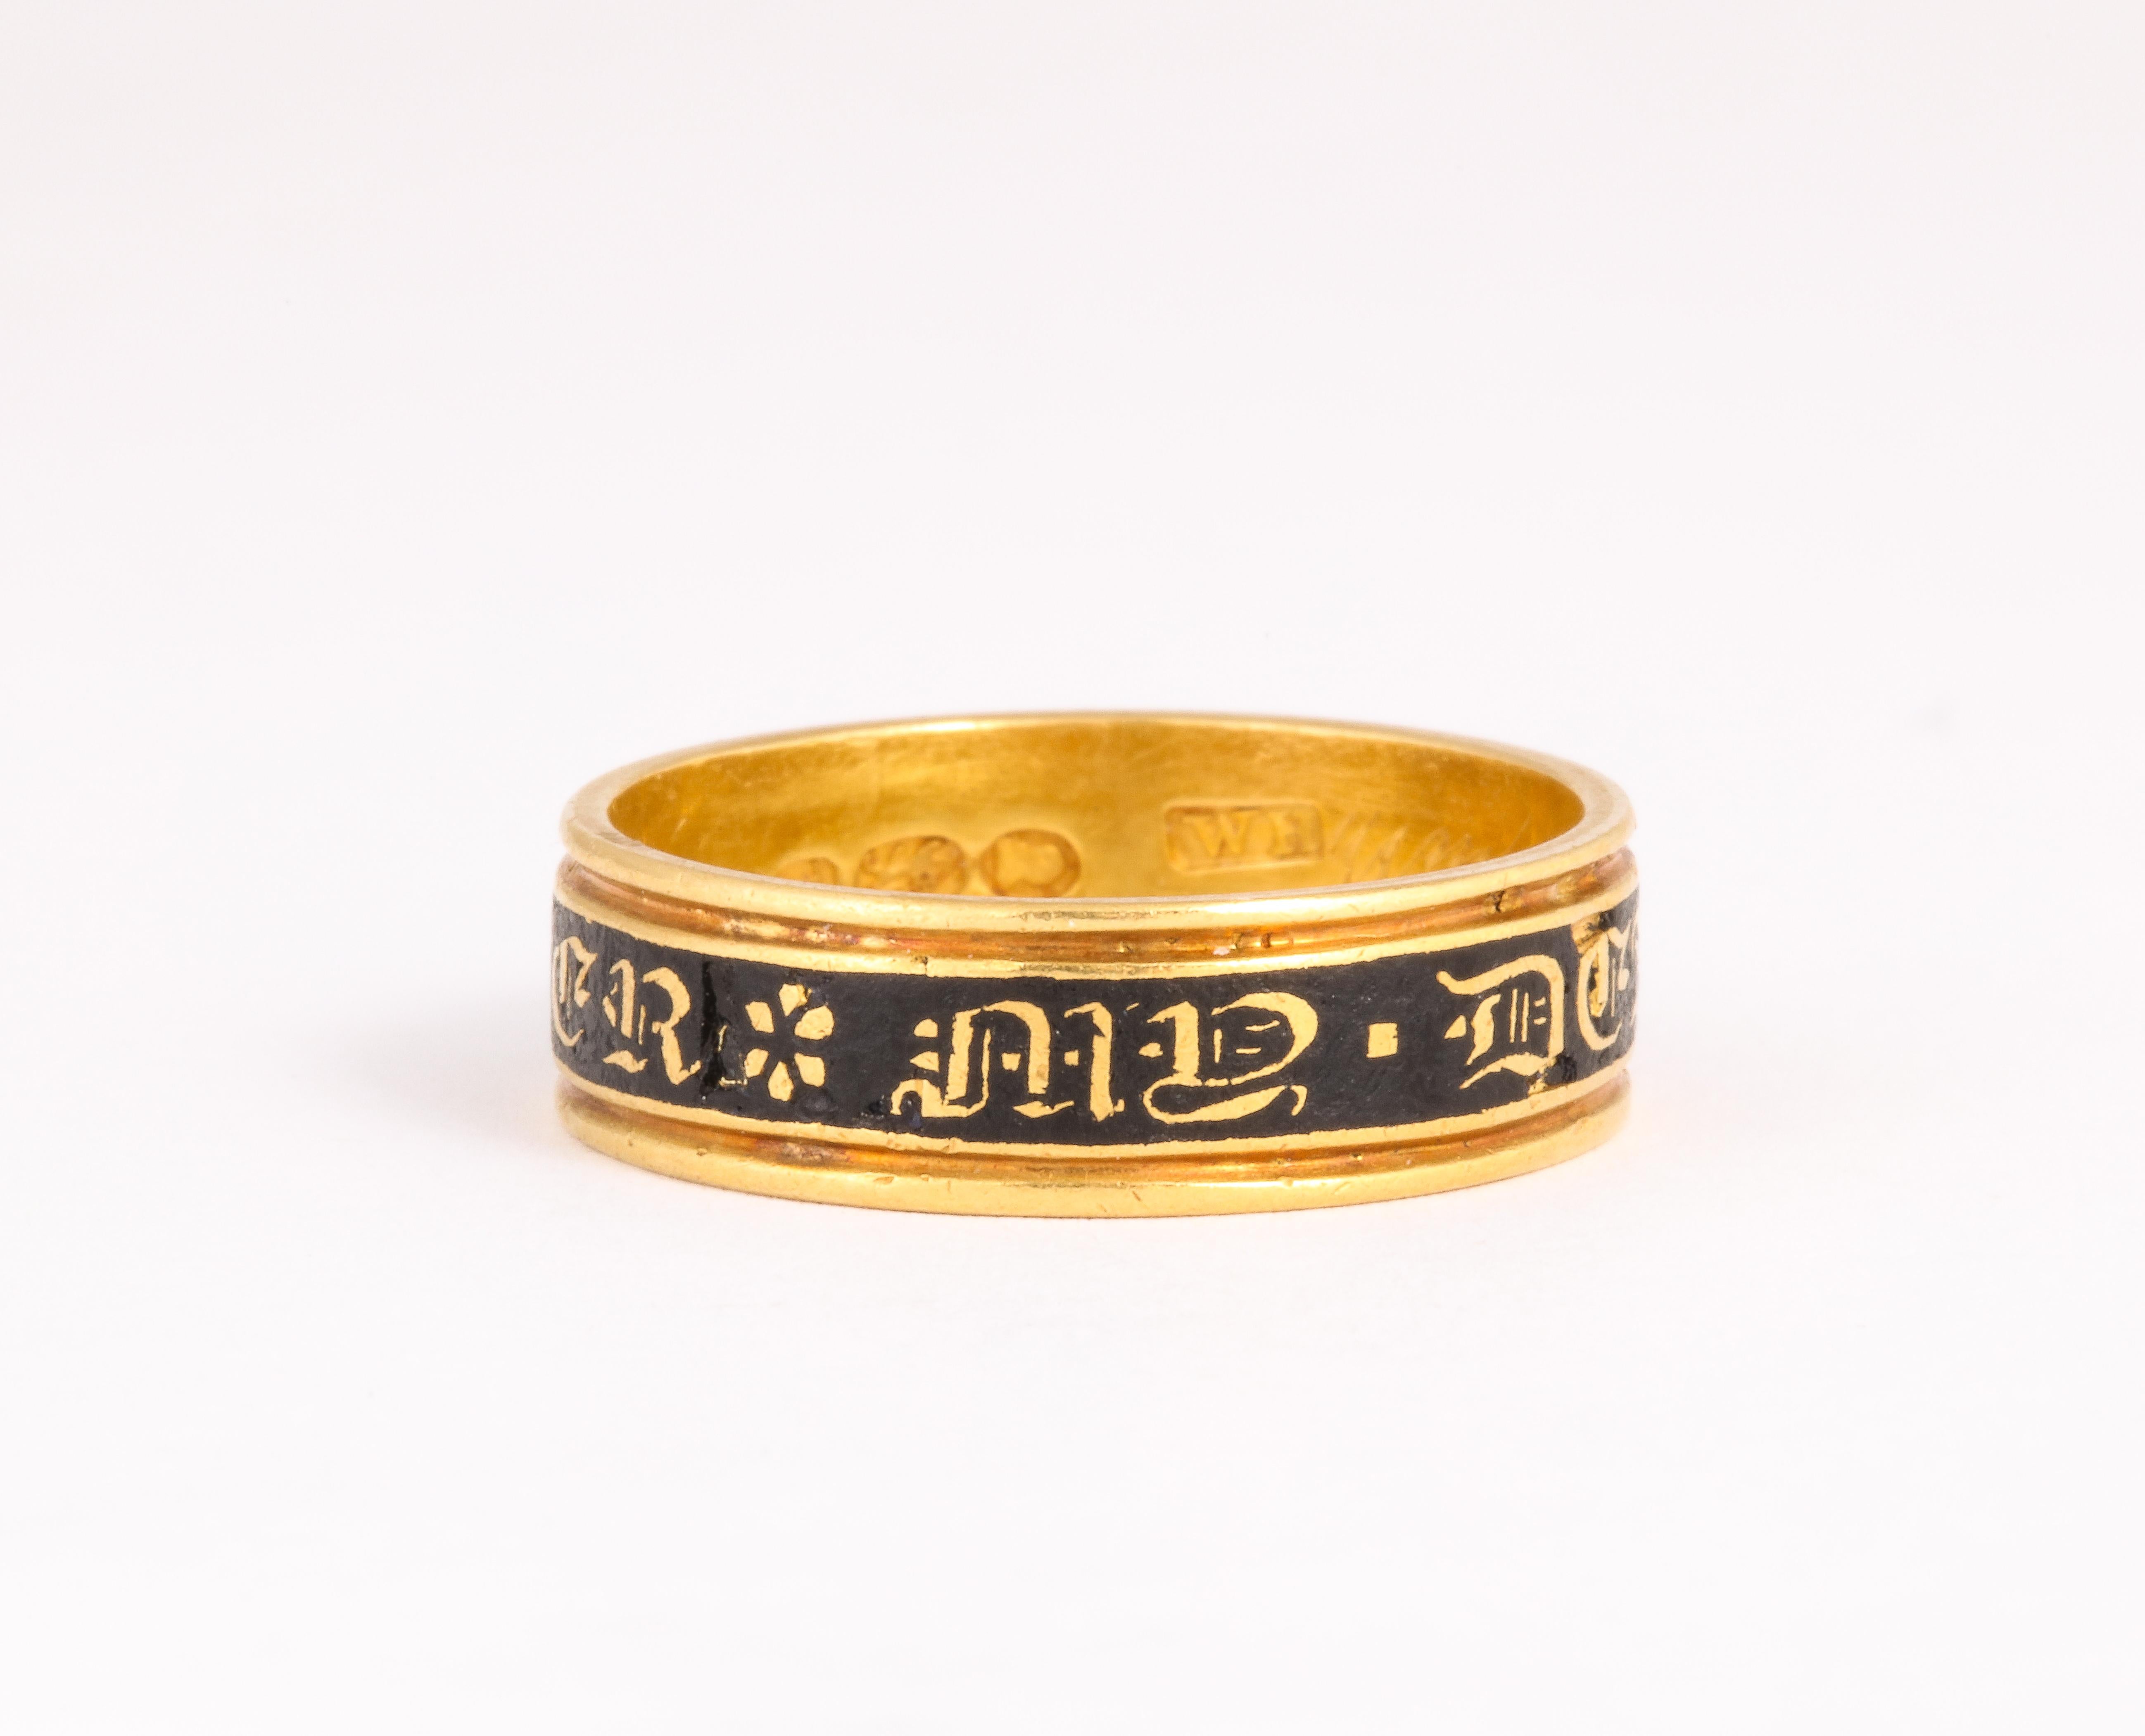 Early Victorian 18 Kt Gold Ring Honoring a Dear Father c. 1842 In Excellent Condition For Sale In Stamford, CT